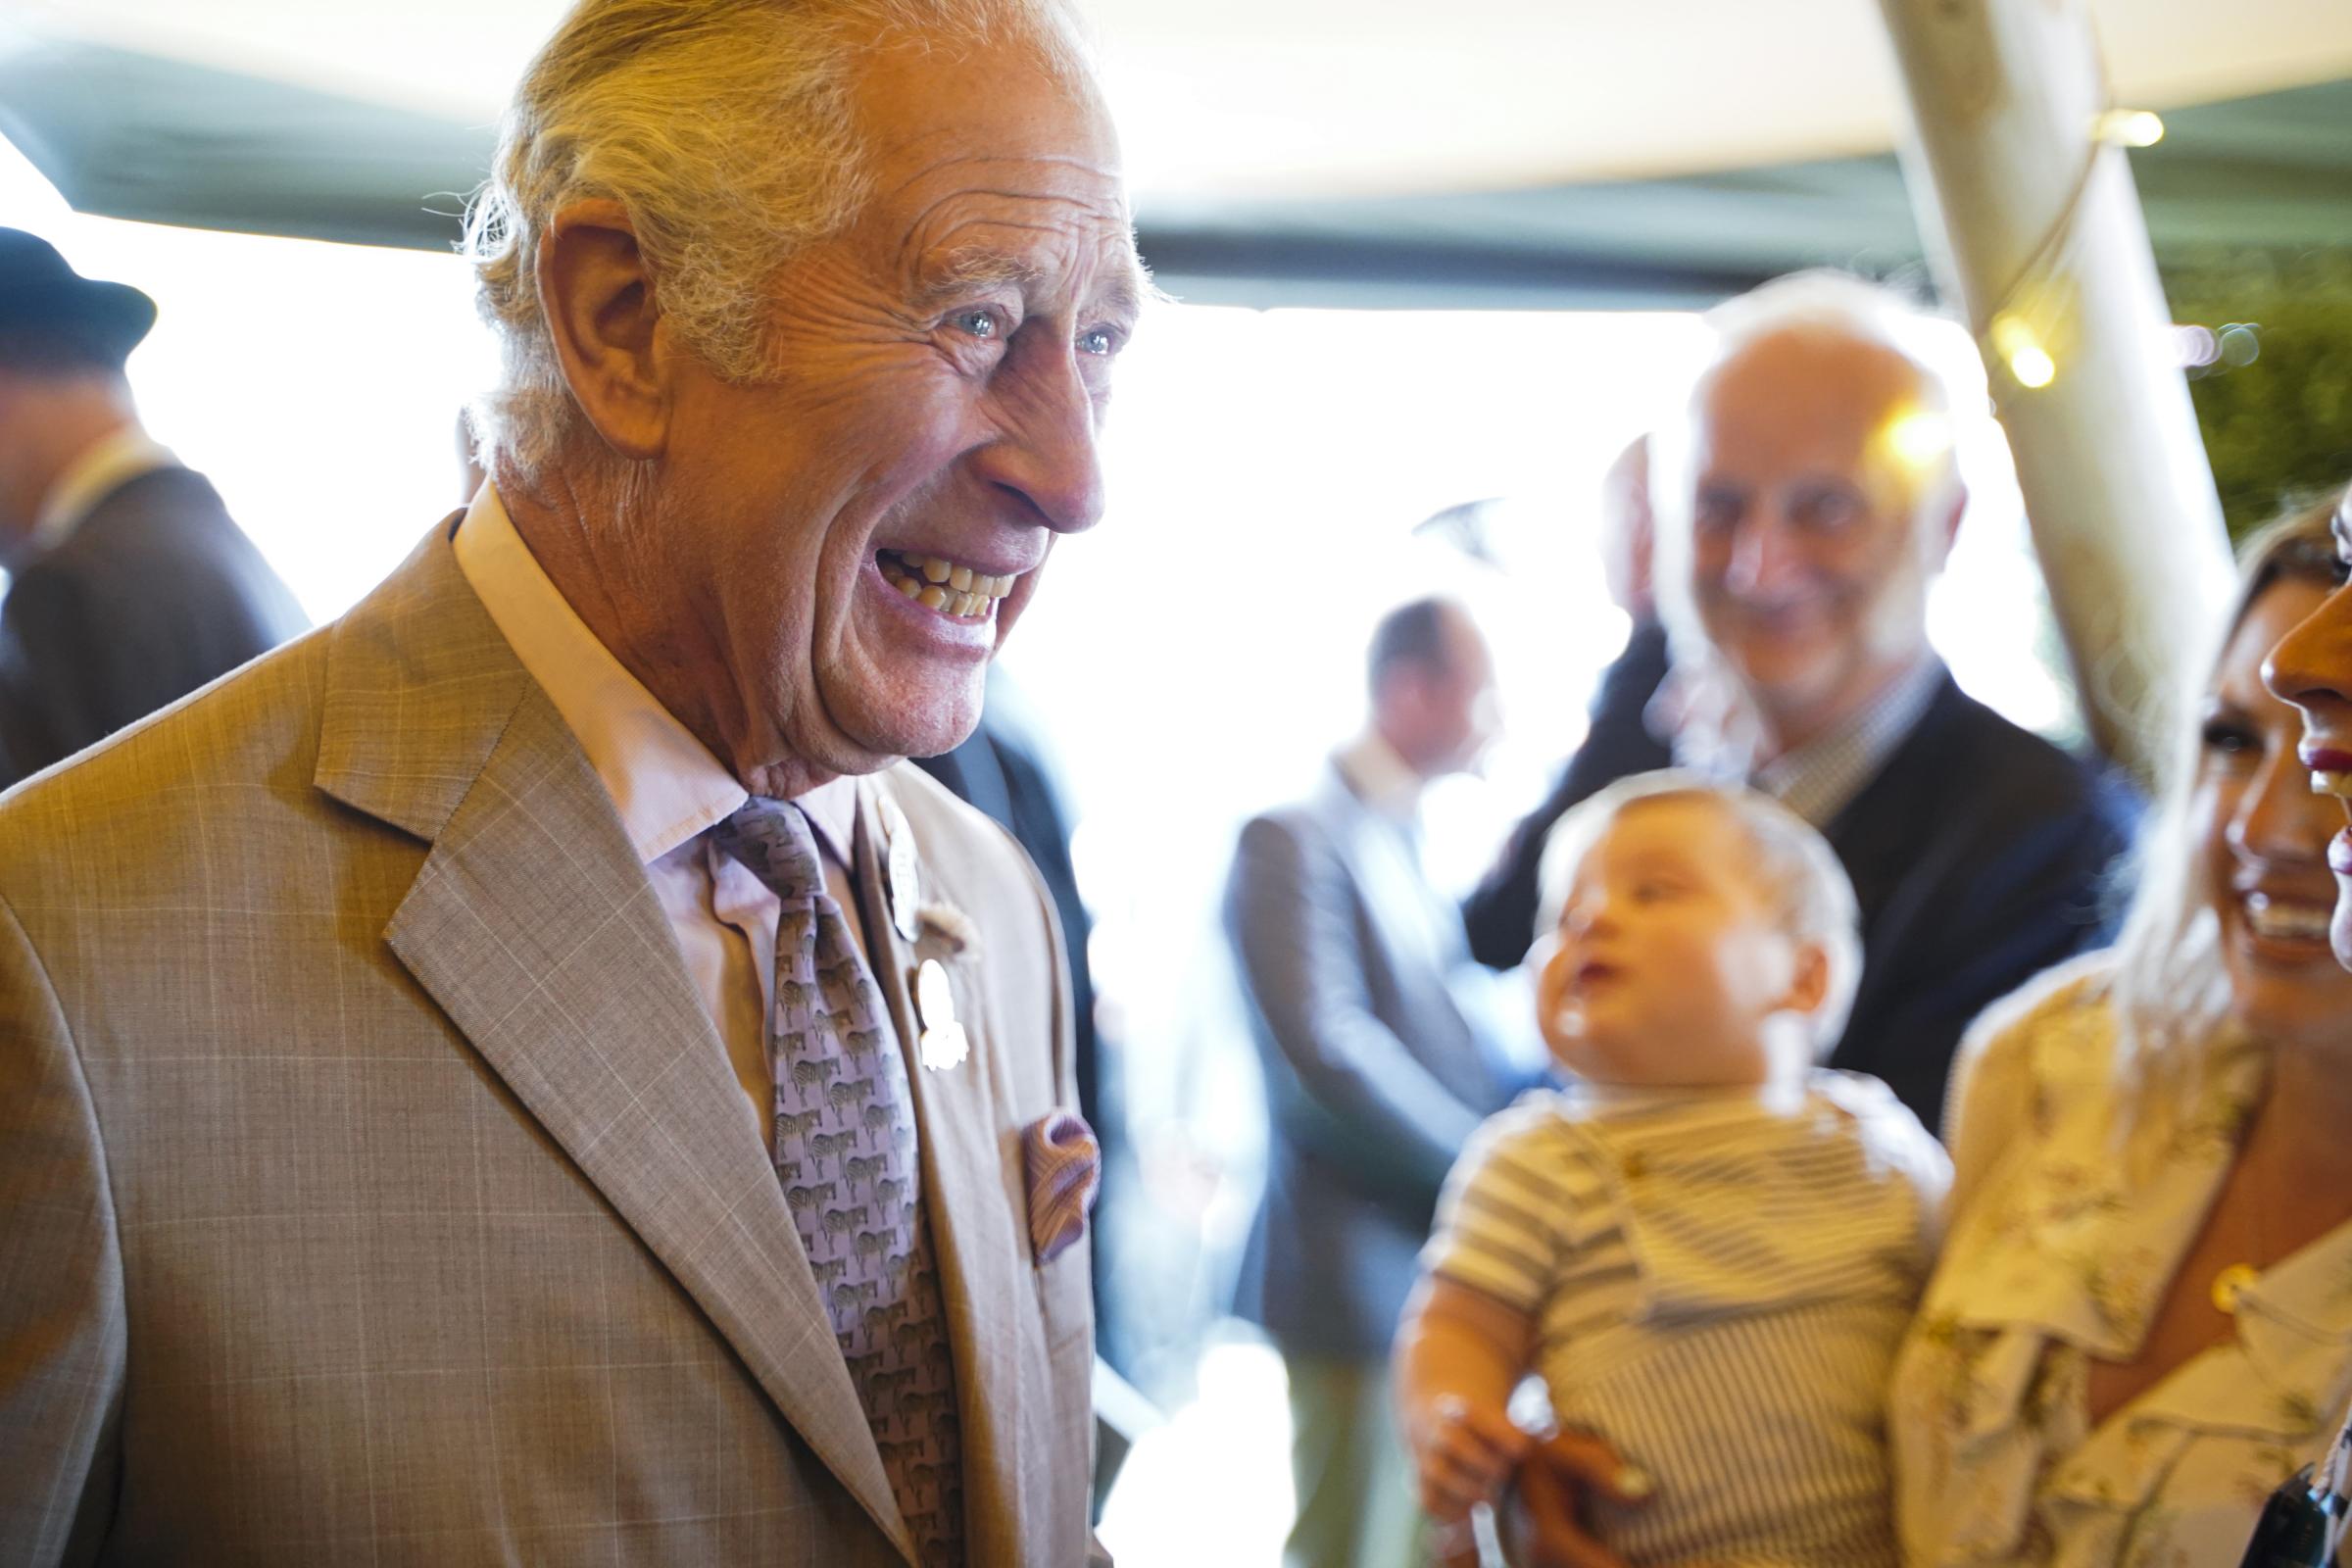 Prince Charles to tell Commonwealth leaders that becoming a republic is their choice